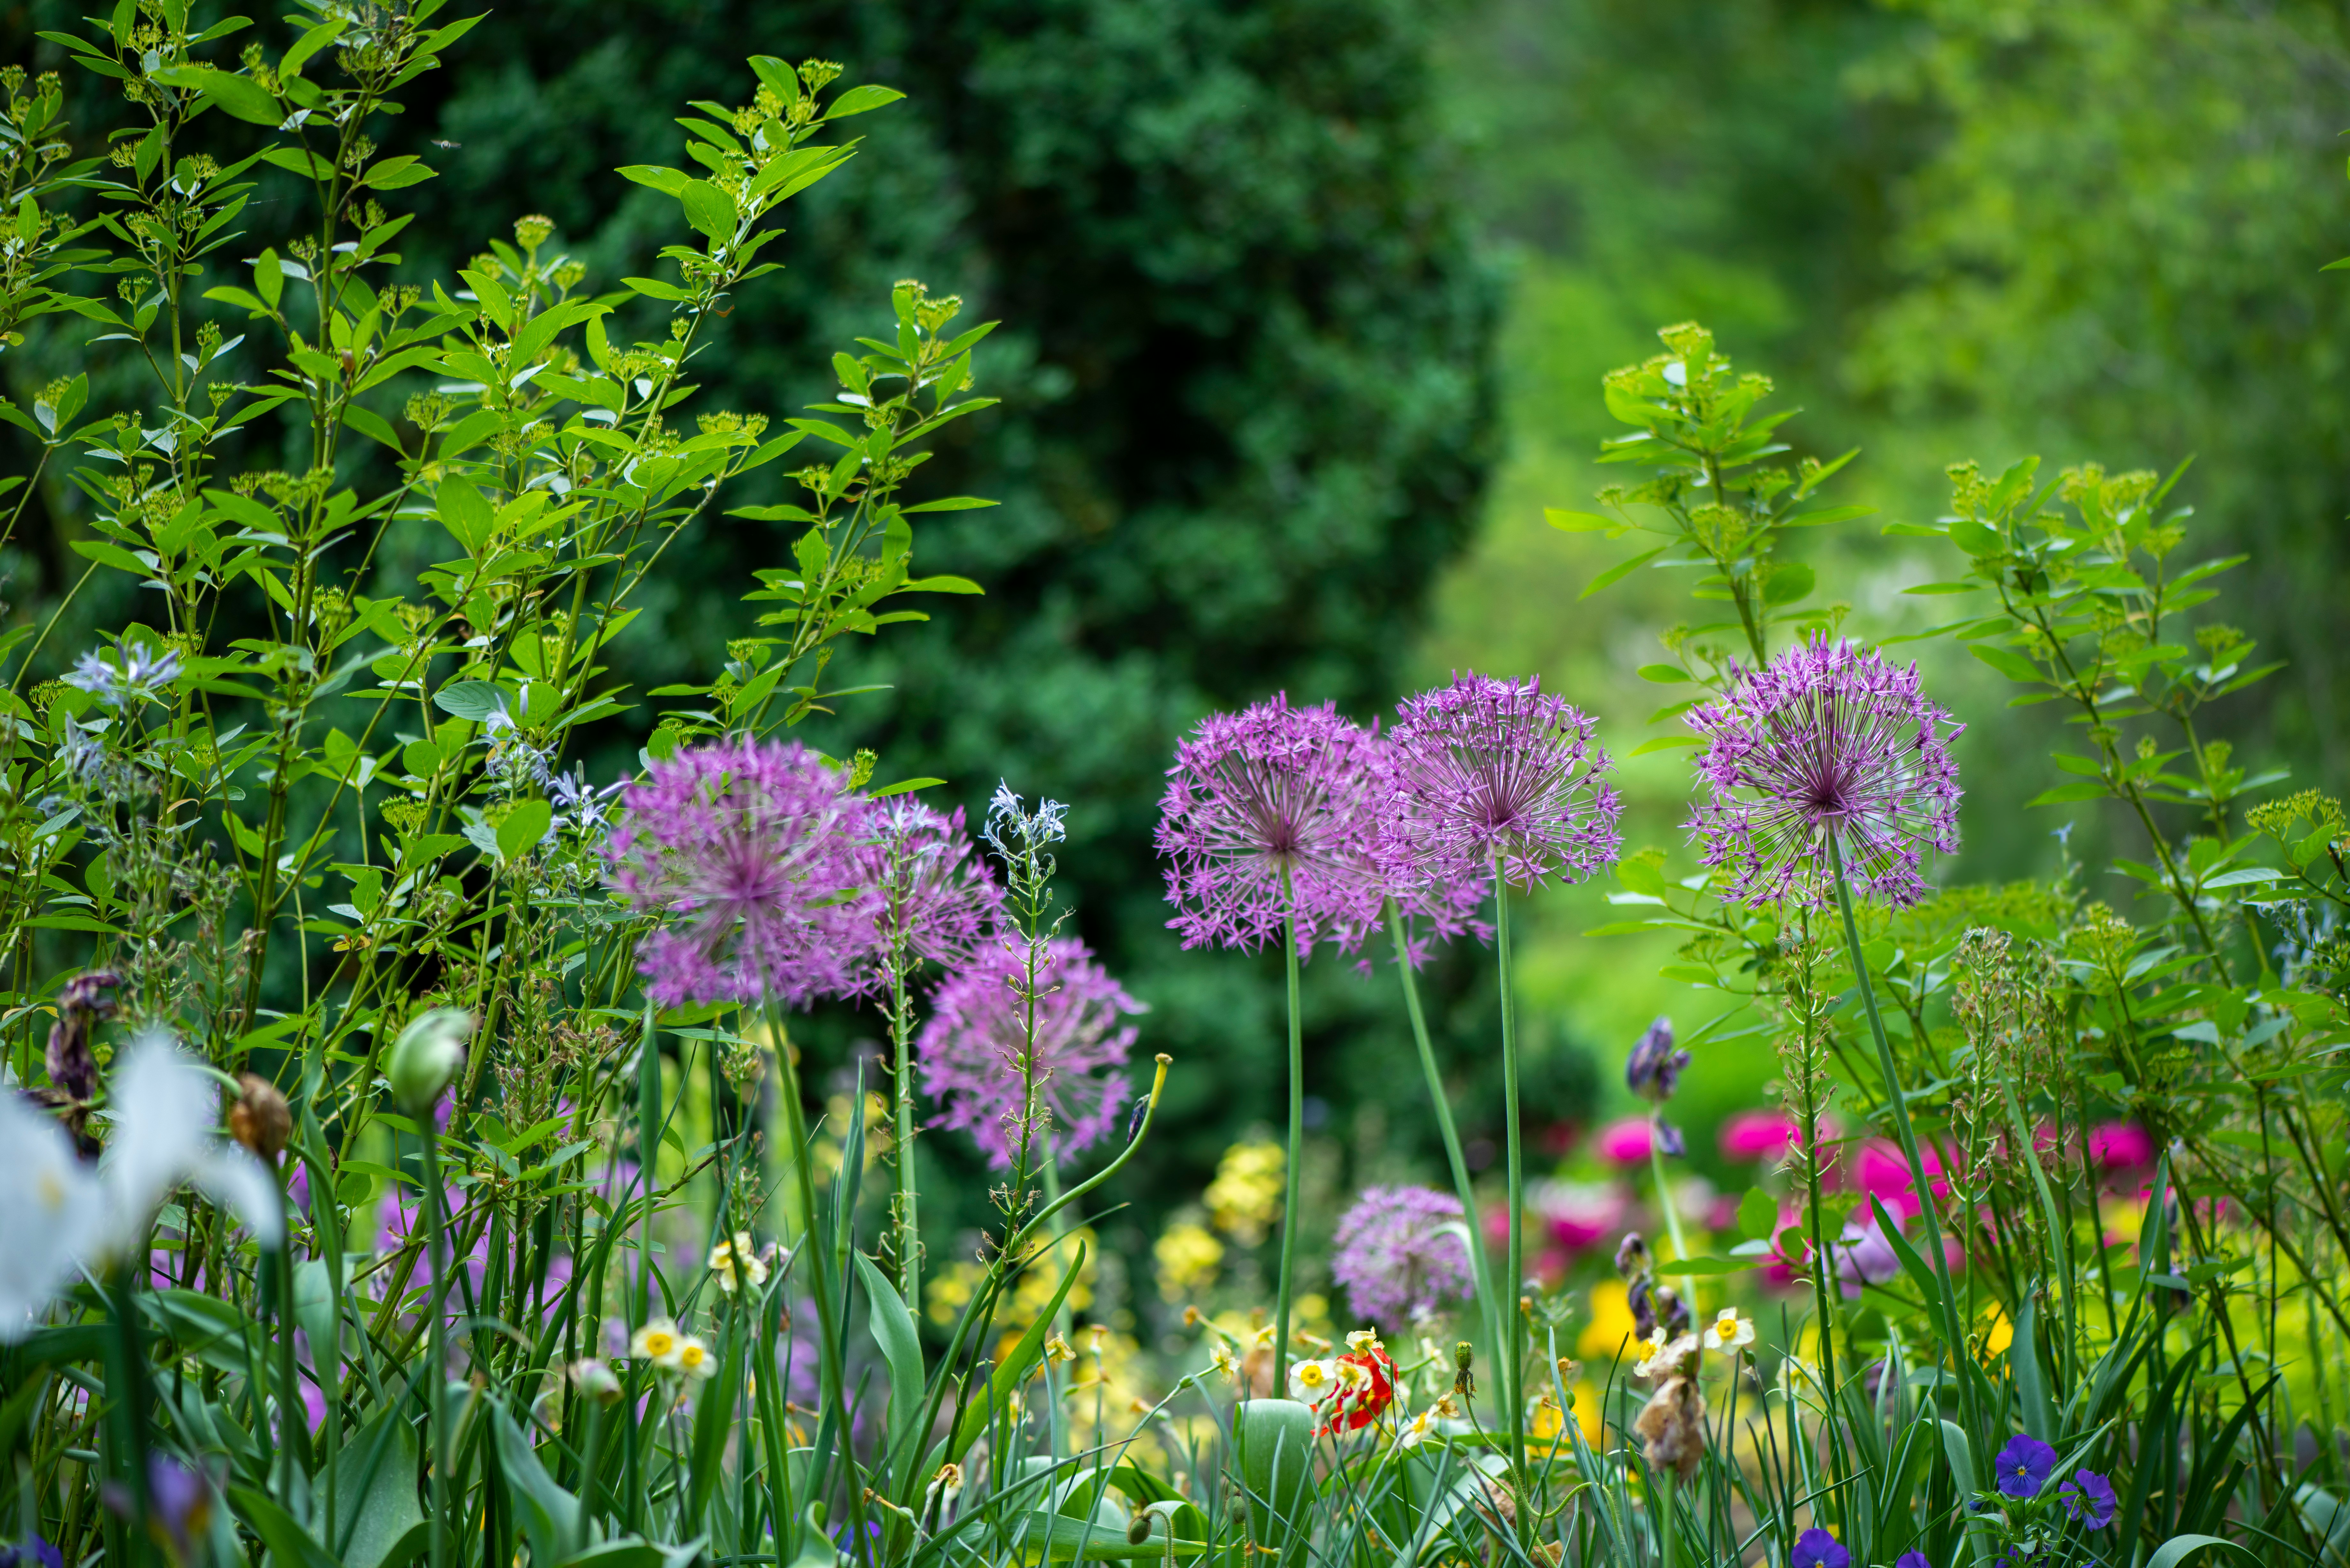 A vibrant garden in London filled with lush greenery and a variety of flowers, including prominent purple alliums. A vibrant garden in London filled with lush greenery and a variety of flowers, including prominent purple alliums.